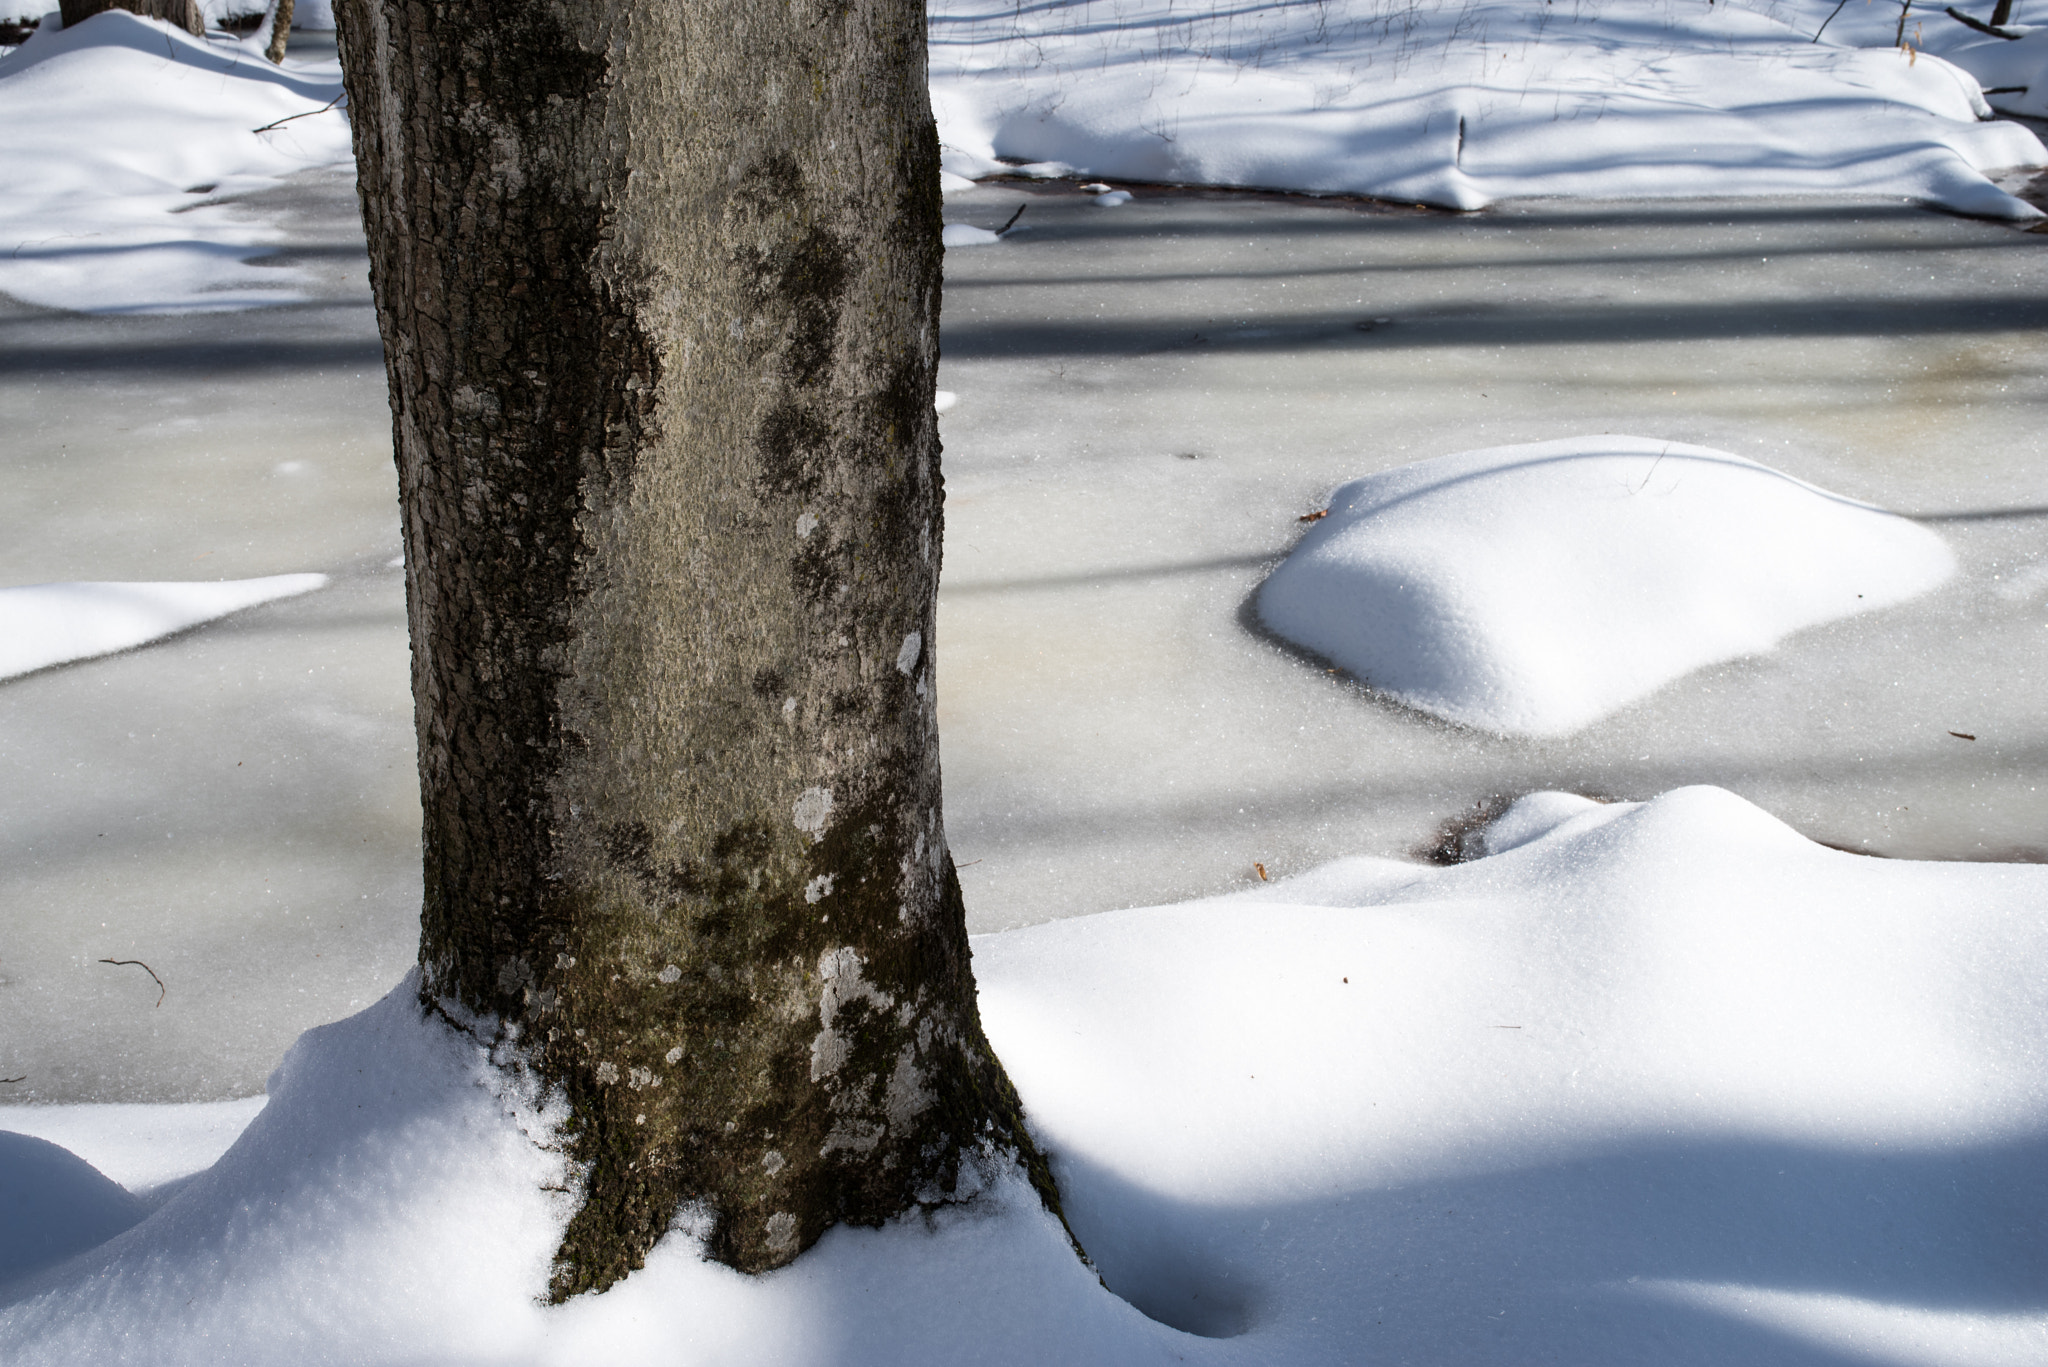 Pentax K-1 sample photo. Trunk and snow clump photography